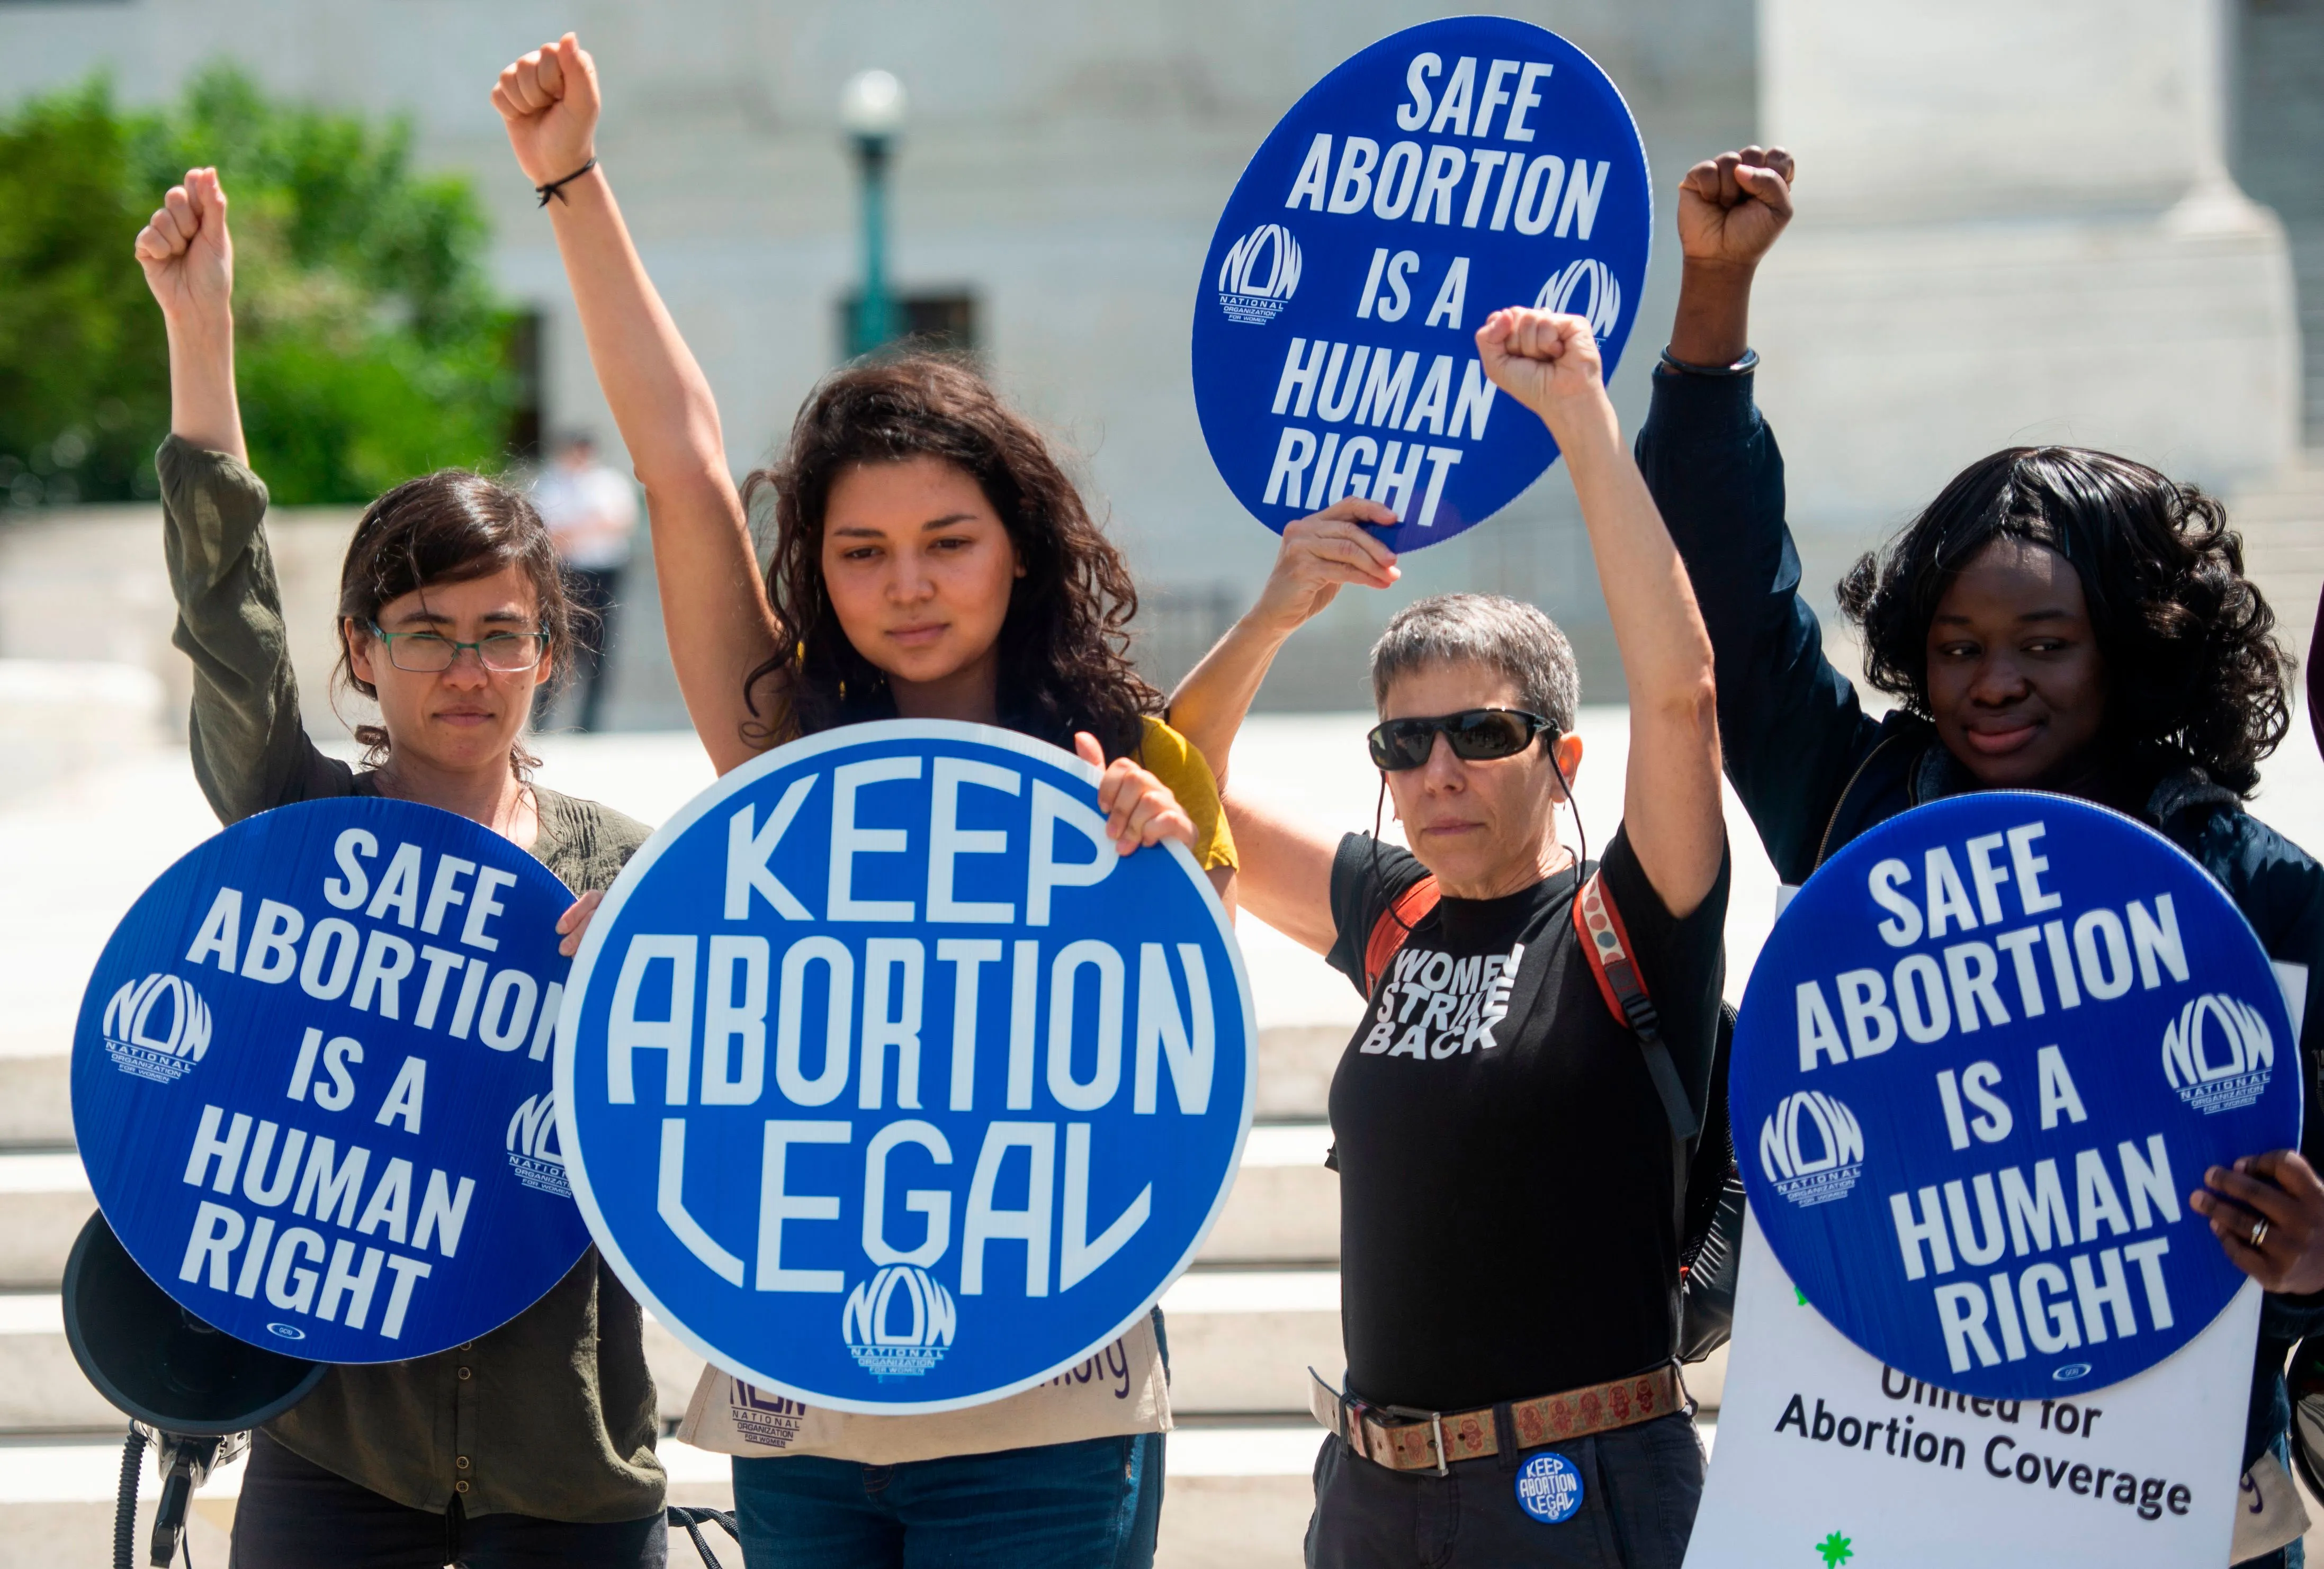 Four protesters hold circular signs that read "Keep Abortion Legal" and "Safe Abortion is a Human Right"